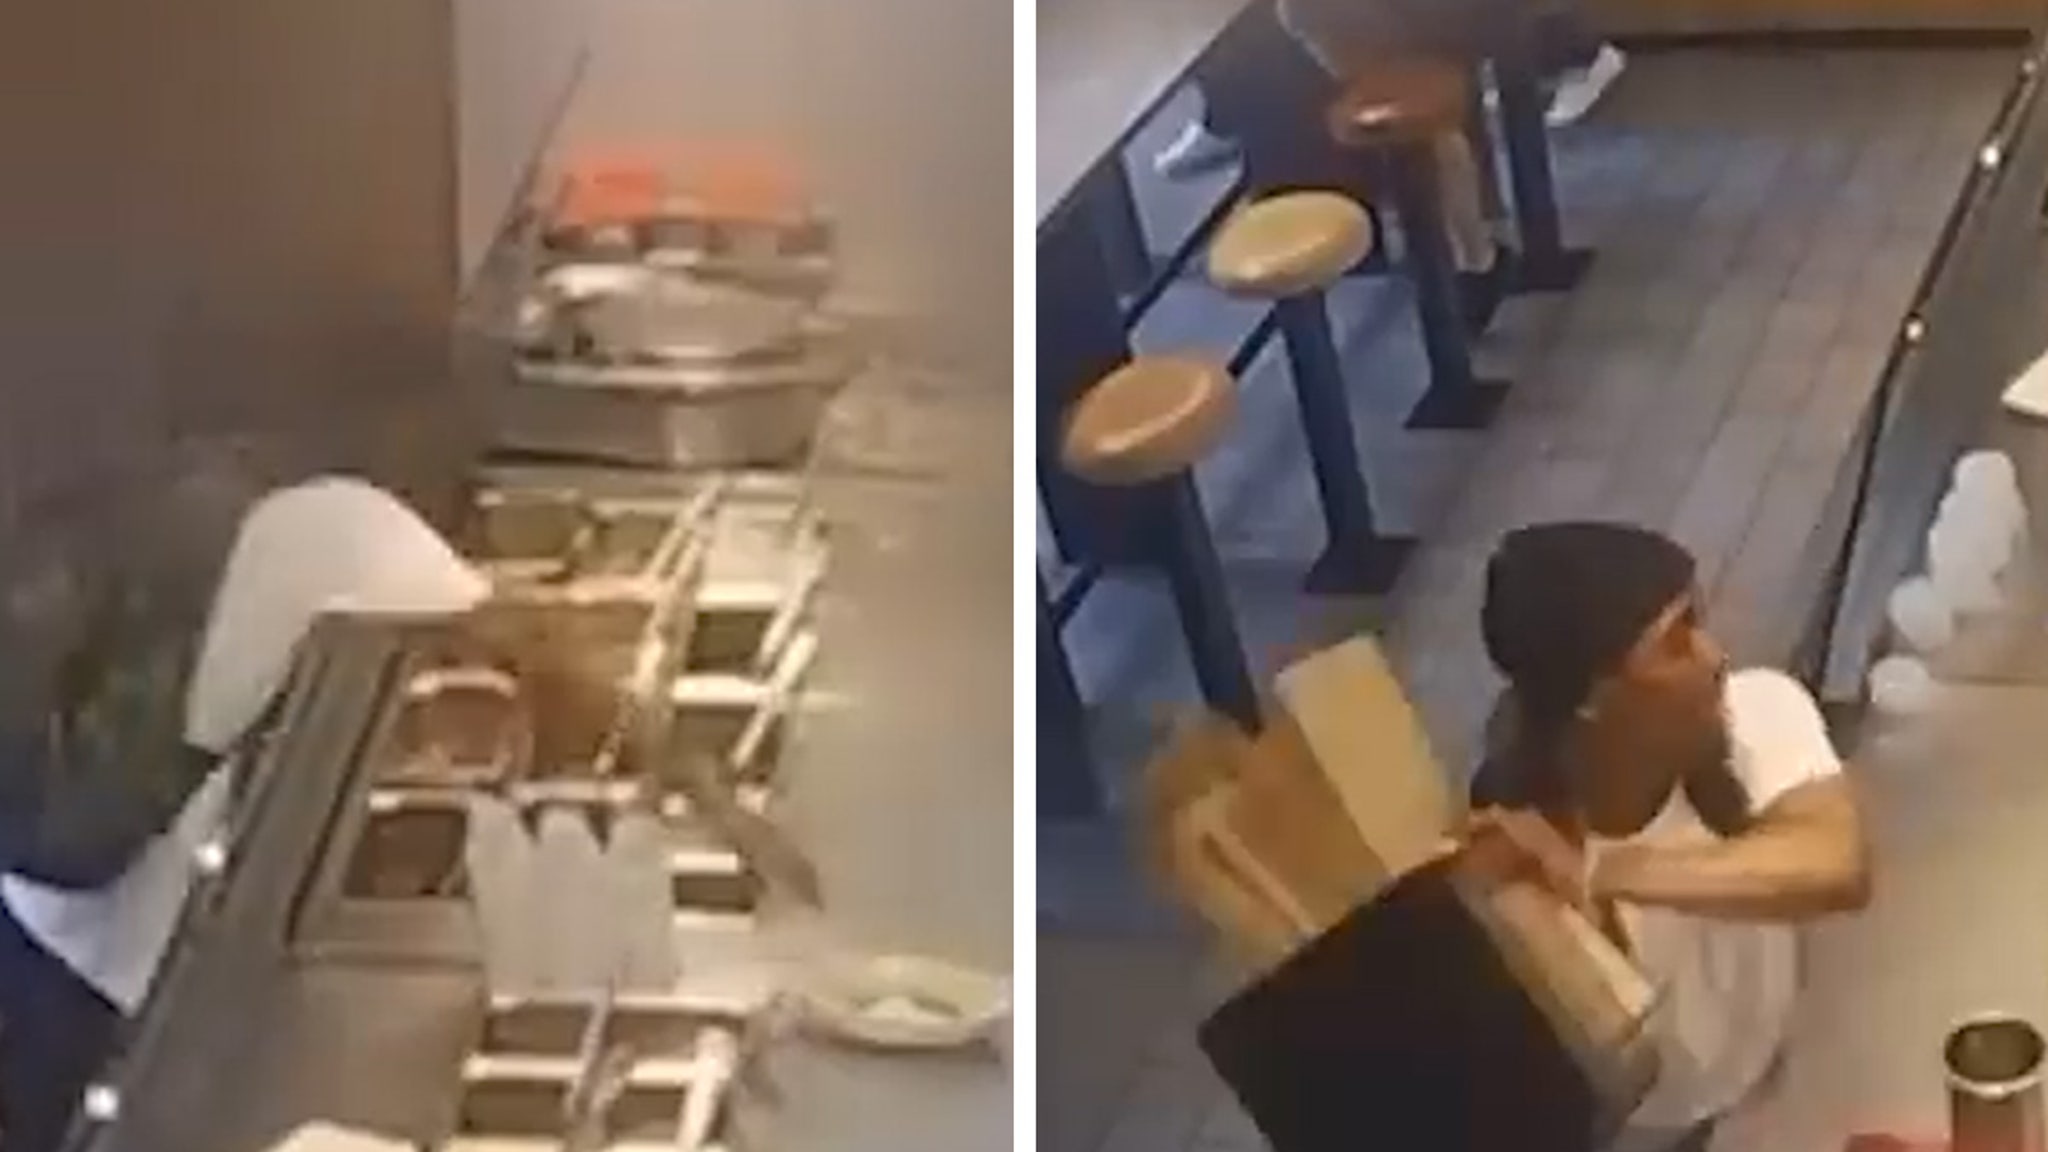 Chipotle Customer Trashes Restaurant Because Food Isn’t Prepared Fast Enough